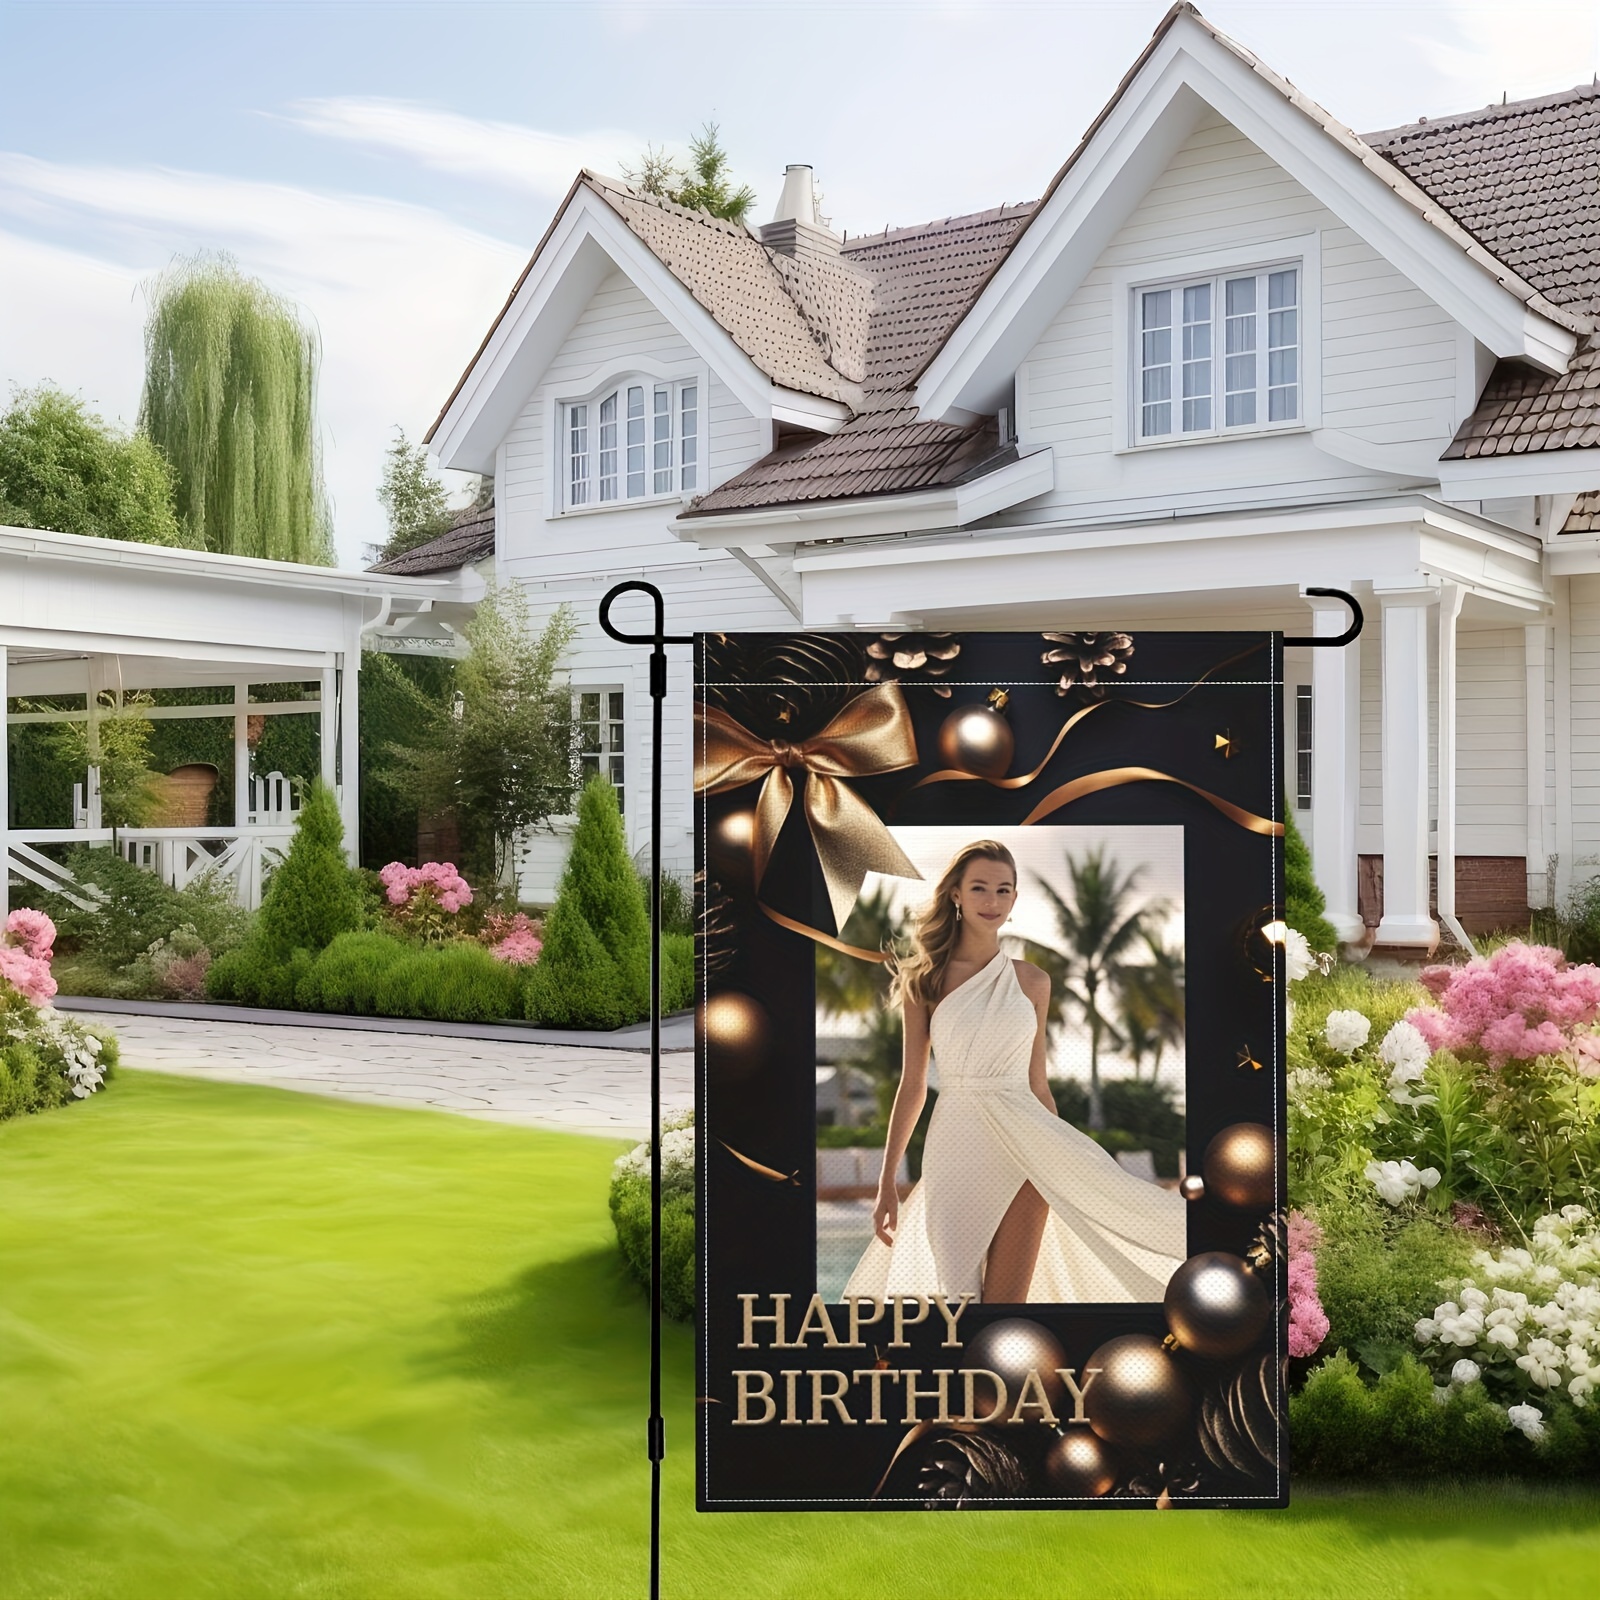 

Custom Happy Birthday Garden Flag - Personalized Photo Linen Fabric Outdoor Decor - Durable Polyester 1pc Party Banner With No Metal Stand - Ideal For Home & Garden Celebration Decorations 12x18 Inch